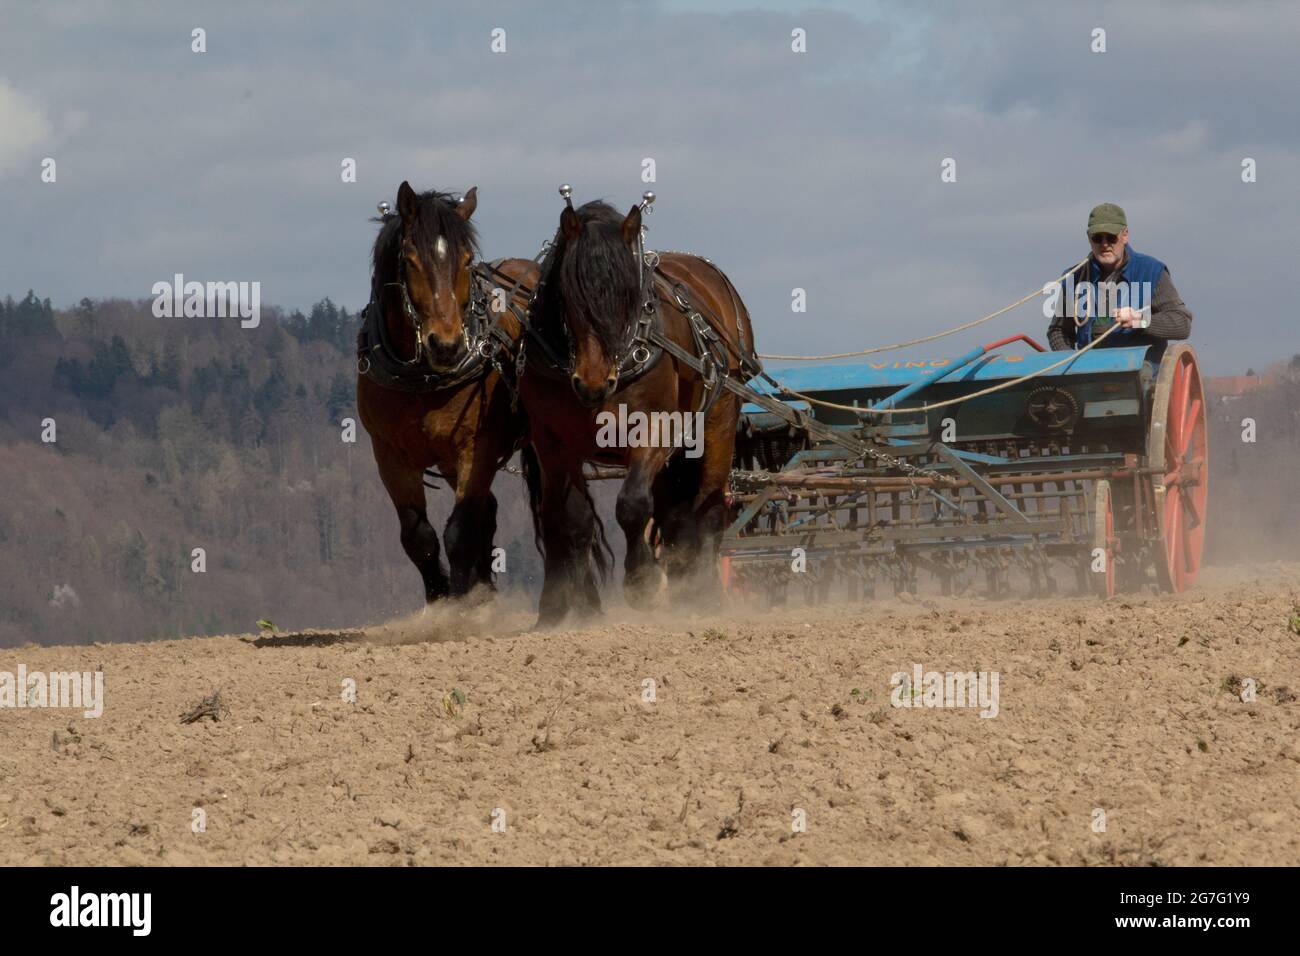 Horses working in agriculture Stock Photo